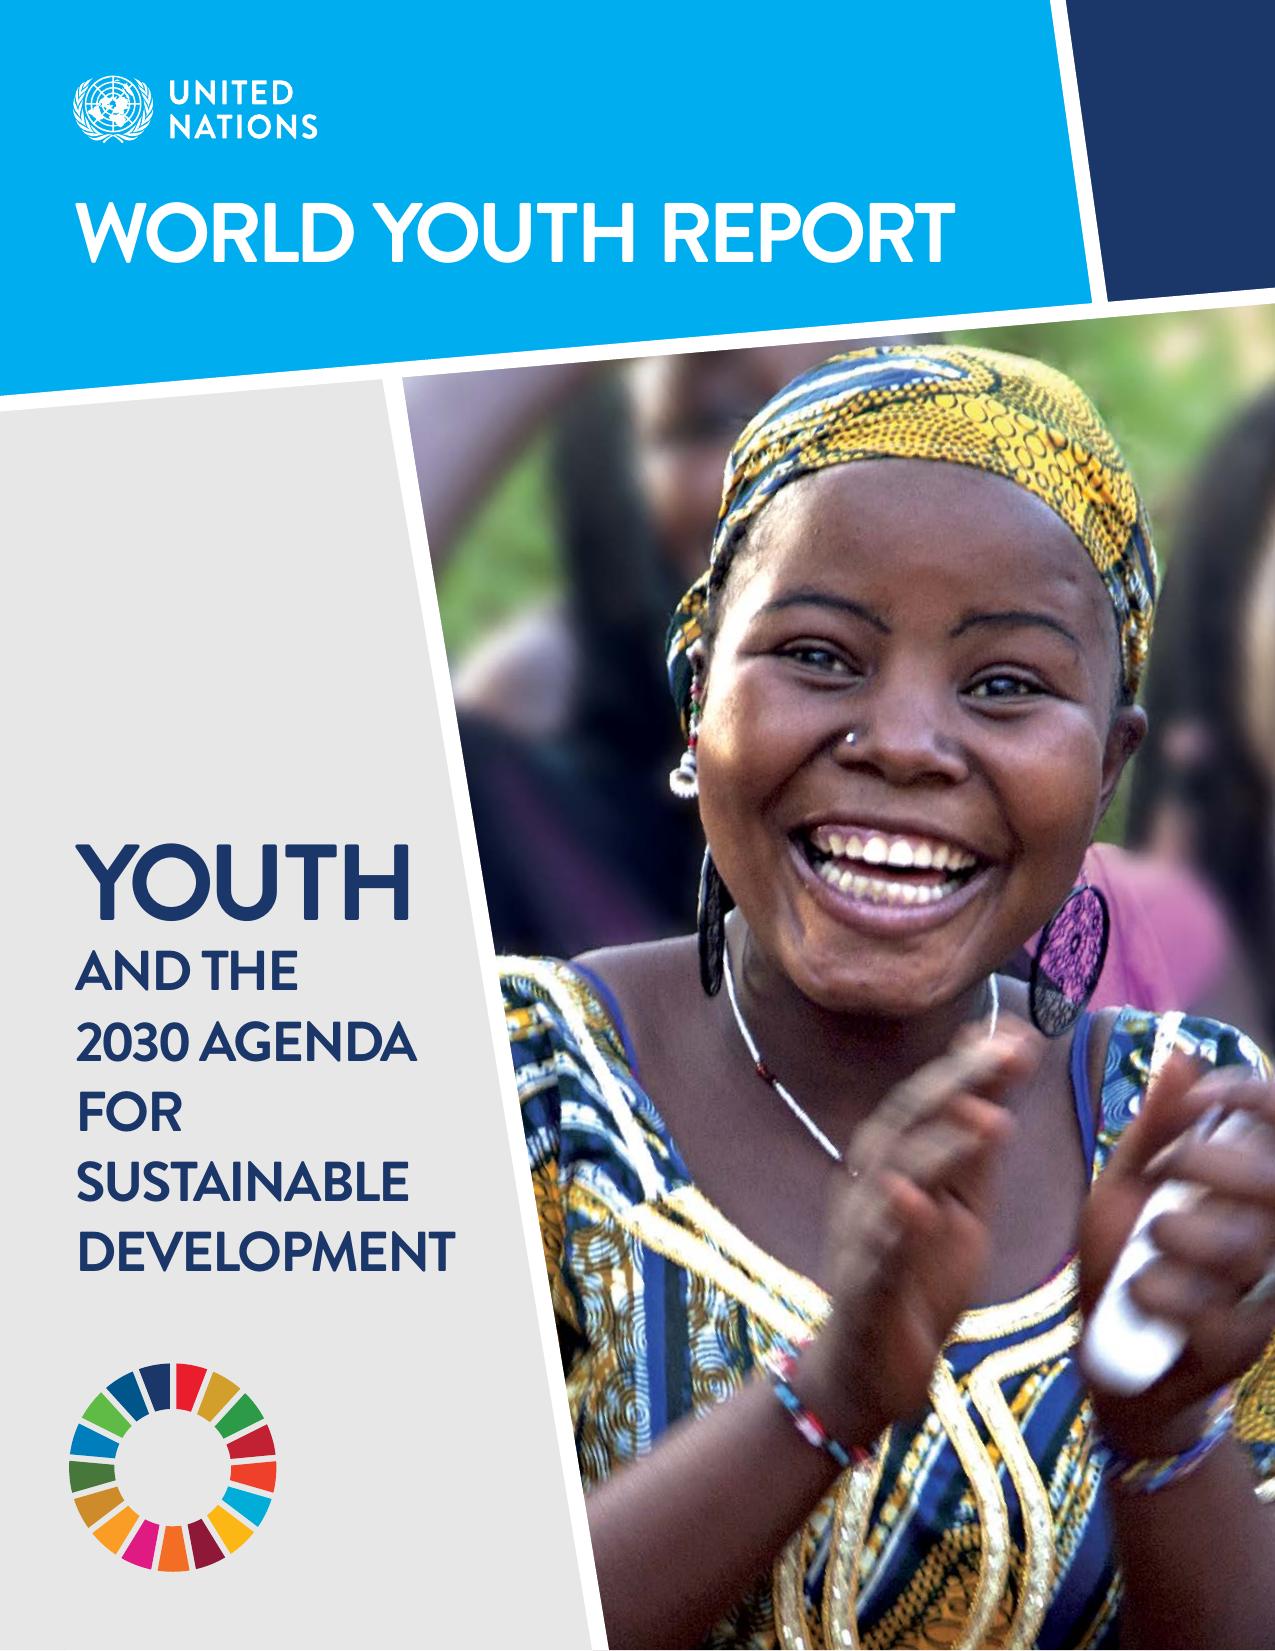 World Youth Report: Youth and the 2030 Agenda for Sustainable Development